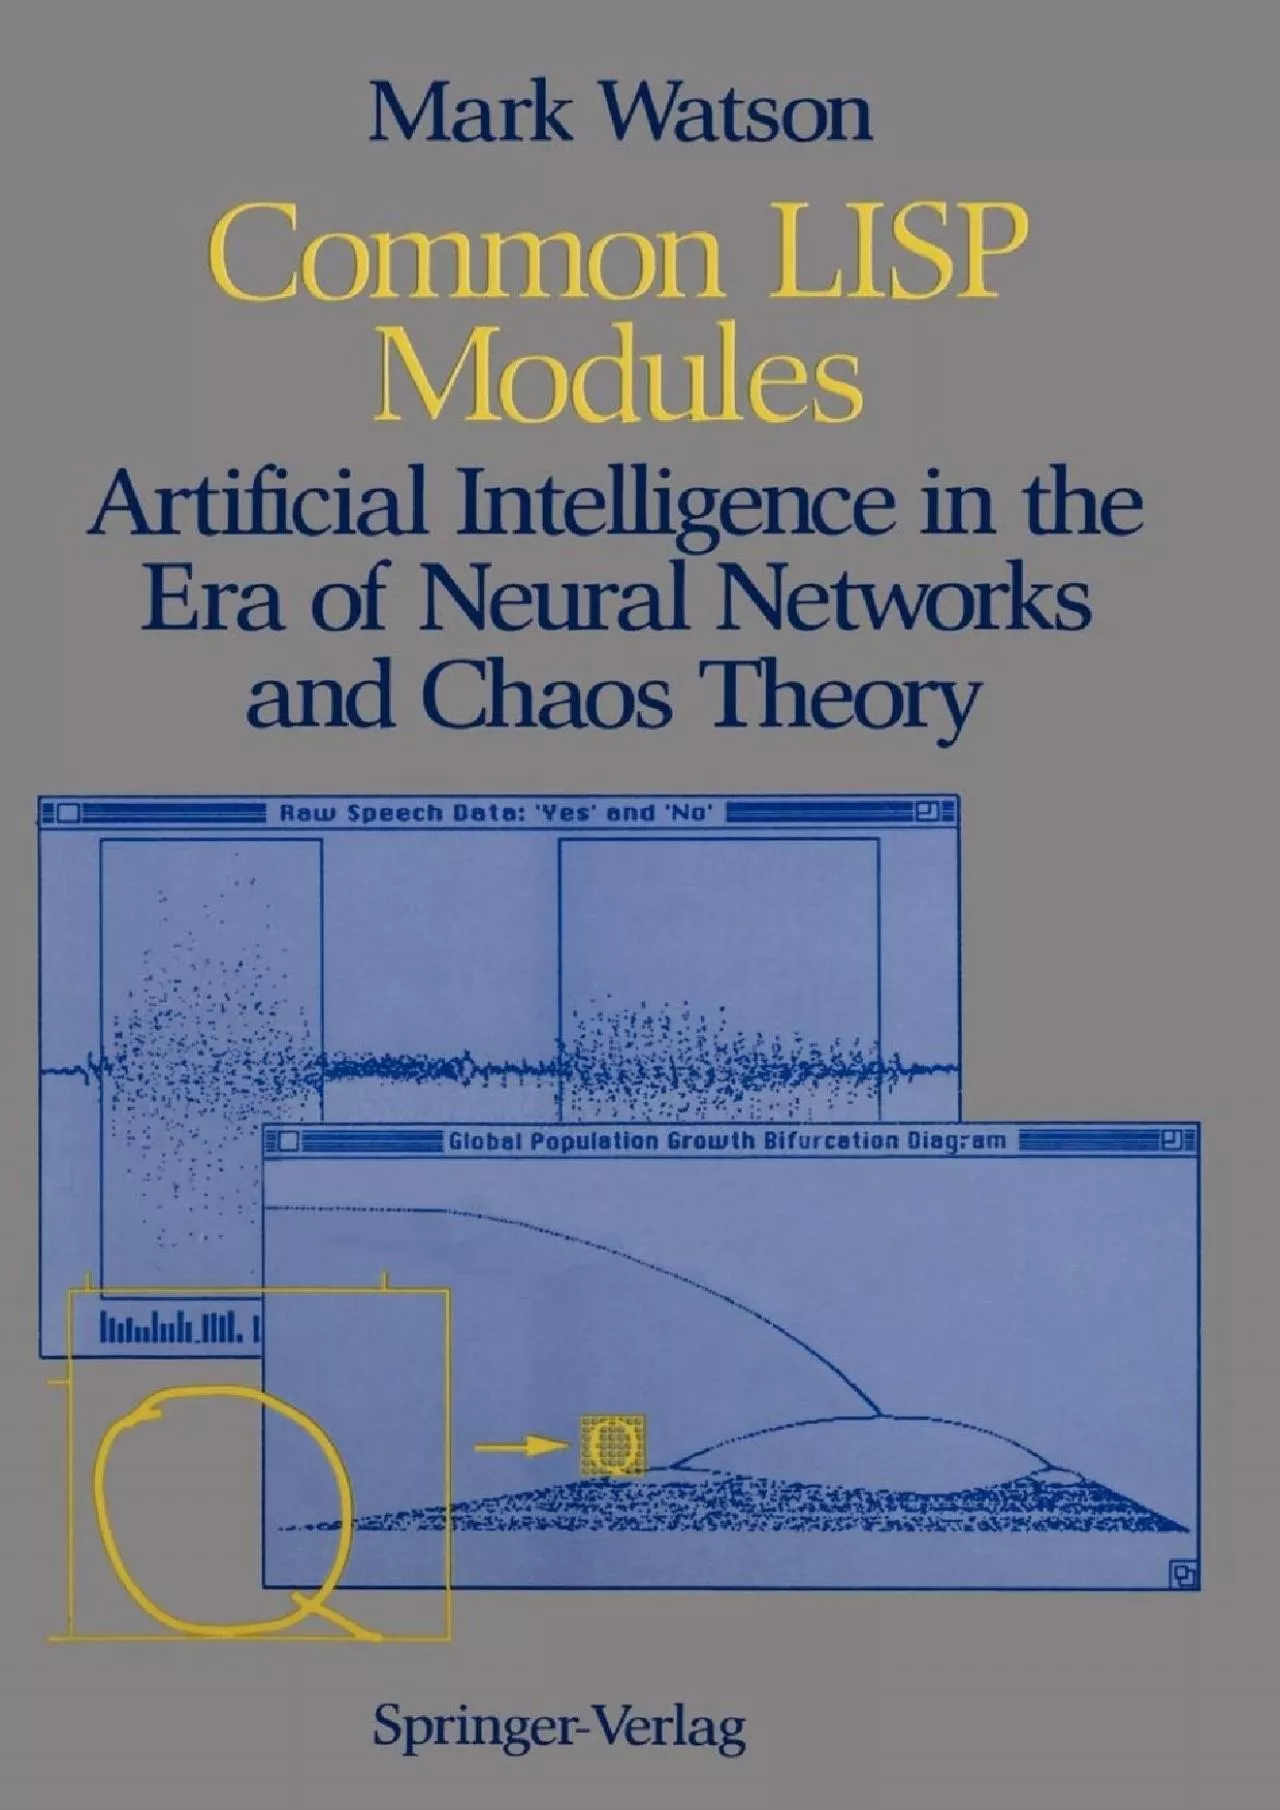 [READING BOOK]-Common LISP Modules: Artificial Intelligence in the Era of Neural Networks